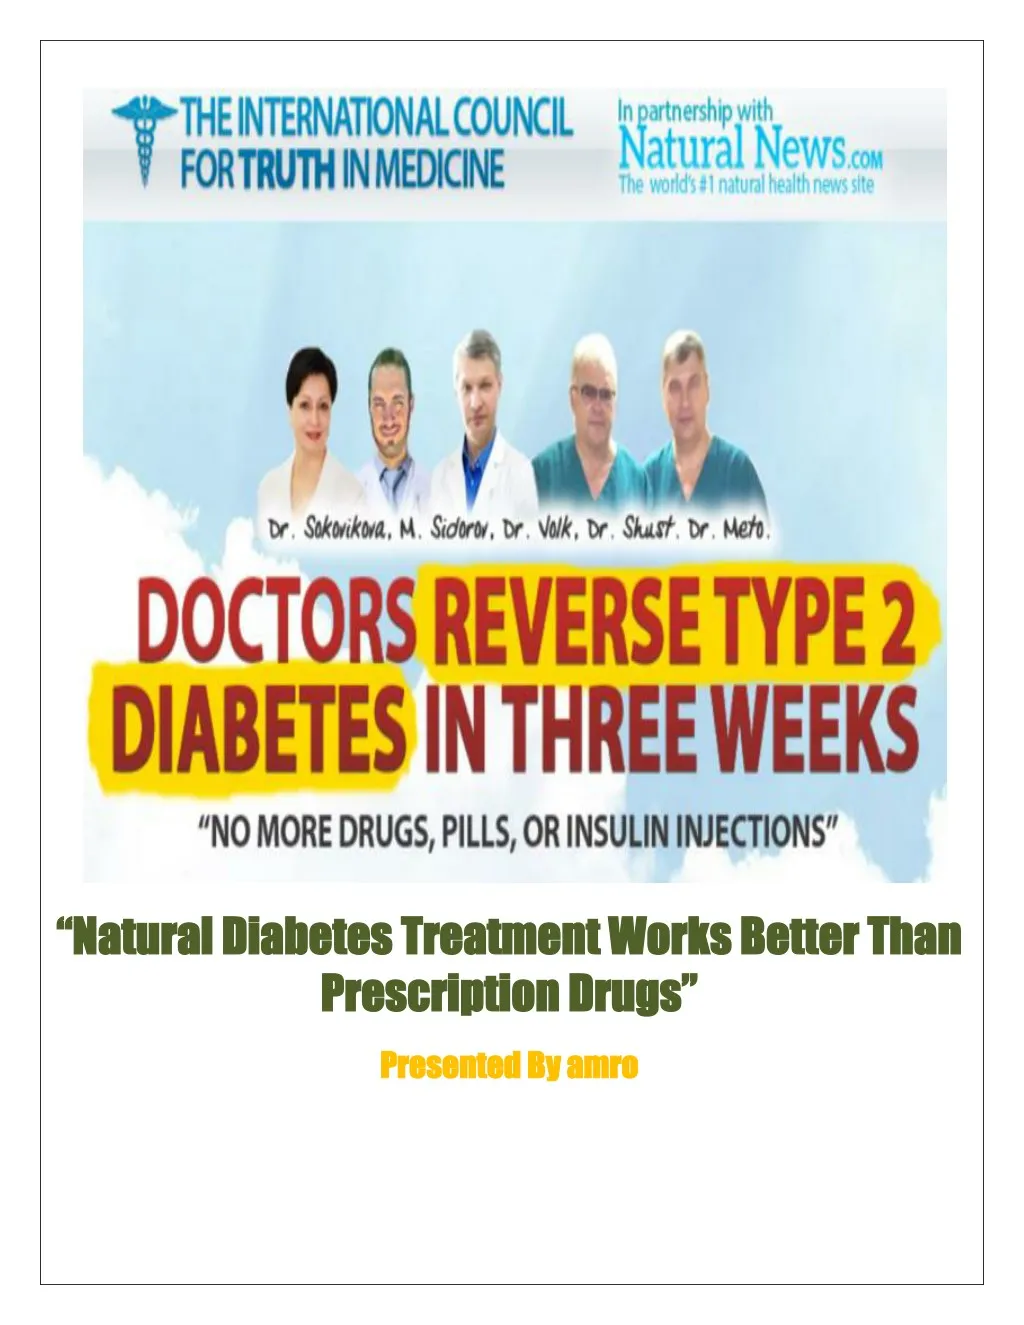 natural diabetes treatment works better than